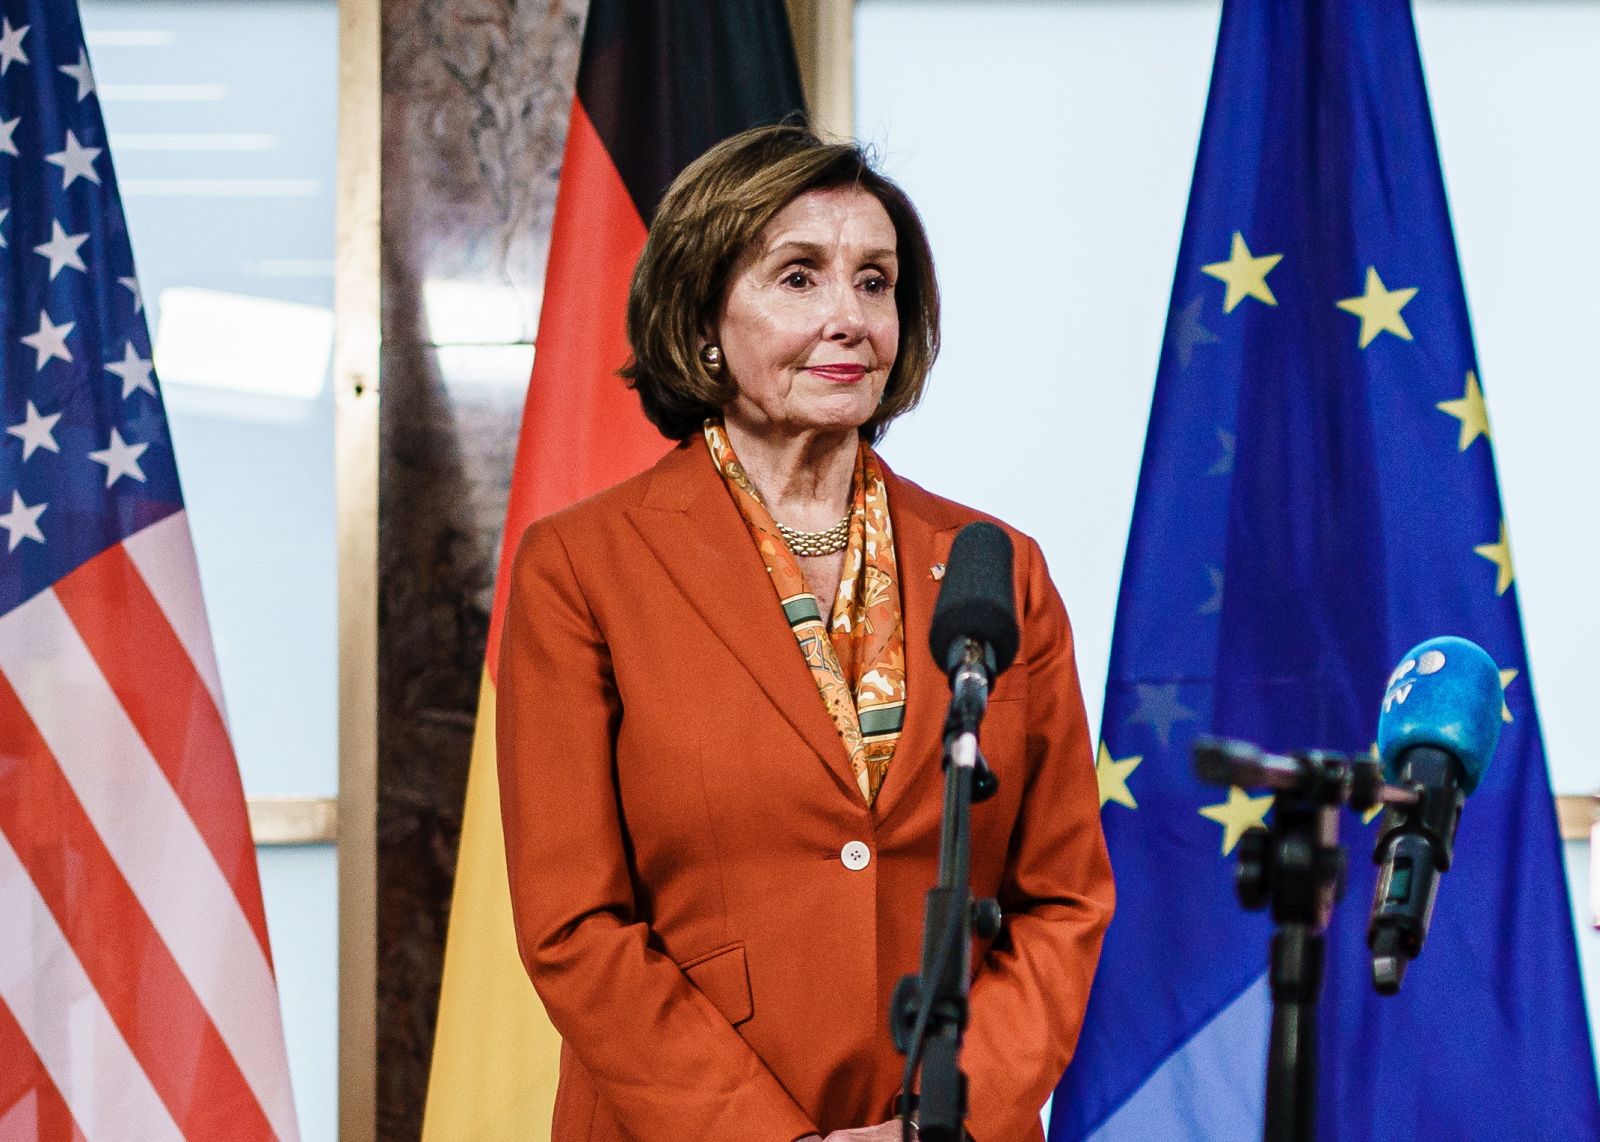 epa10188394 Speaker of the United States House of Representatives Nancy Pelosi (L) and German Foreign Minister Annalena Baerbock attend a press statement at the Foreign Ministry in Berlin, Germany, 16 September 2022. US House Speaker Pelosi is on a two day visit to Germany from 15 to 16 September 2022.  EPA/CLEMENS BILAN